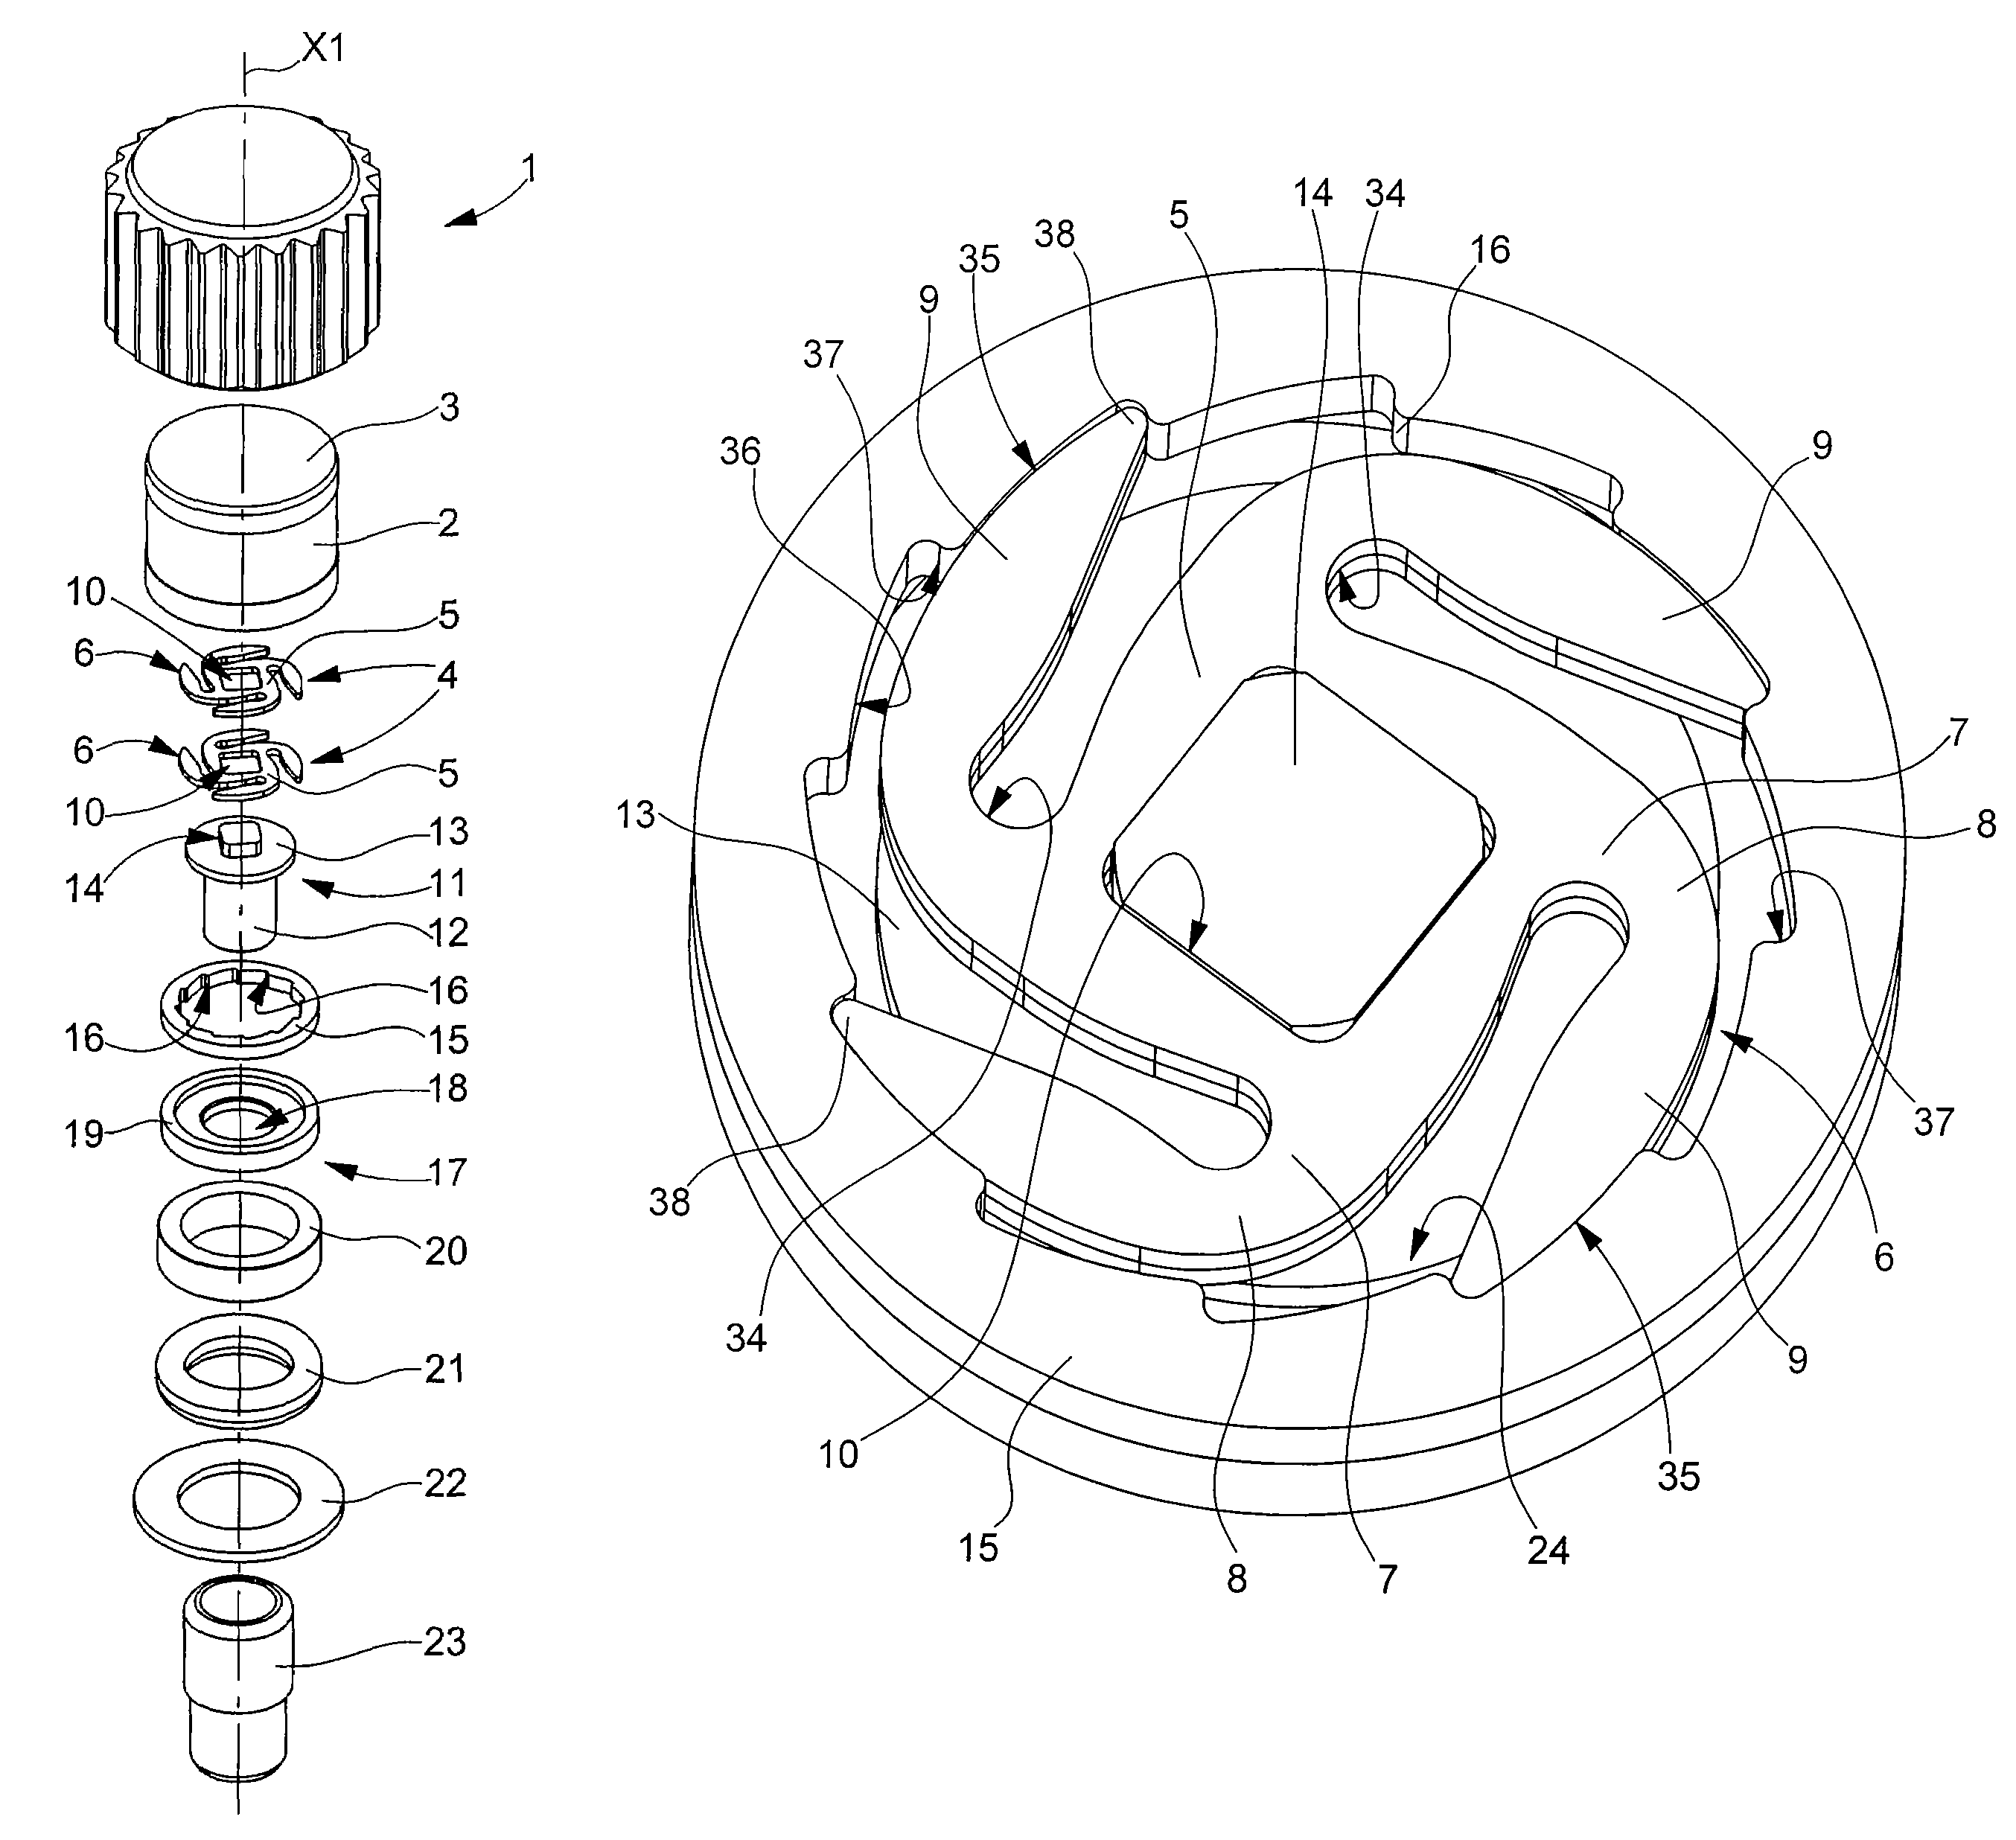 Crown for timepiece with disconnecting gear device